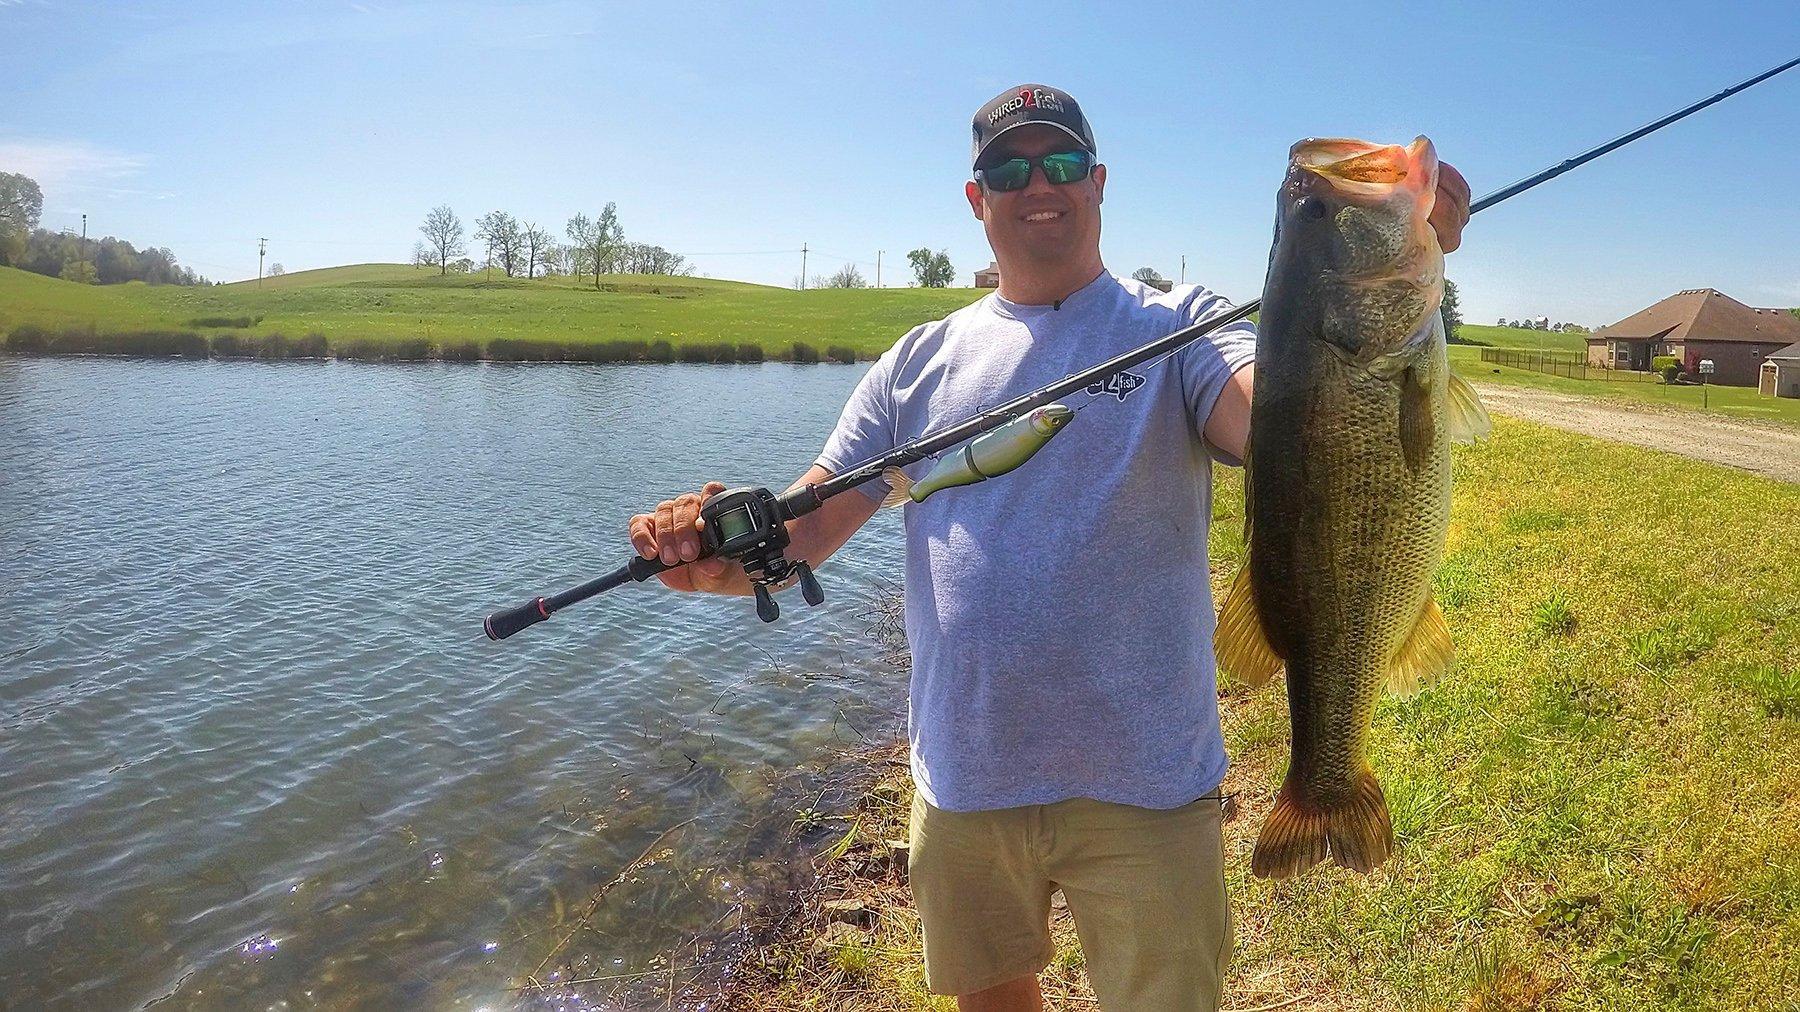 Bank Fishing with Big Swimbaits for Bass - Wired2Fish